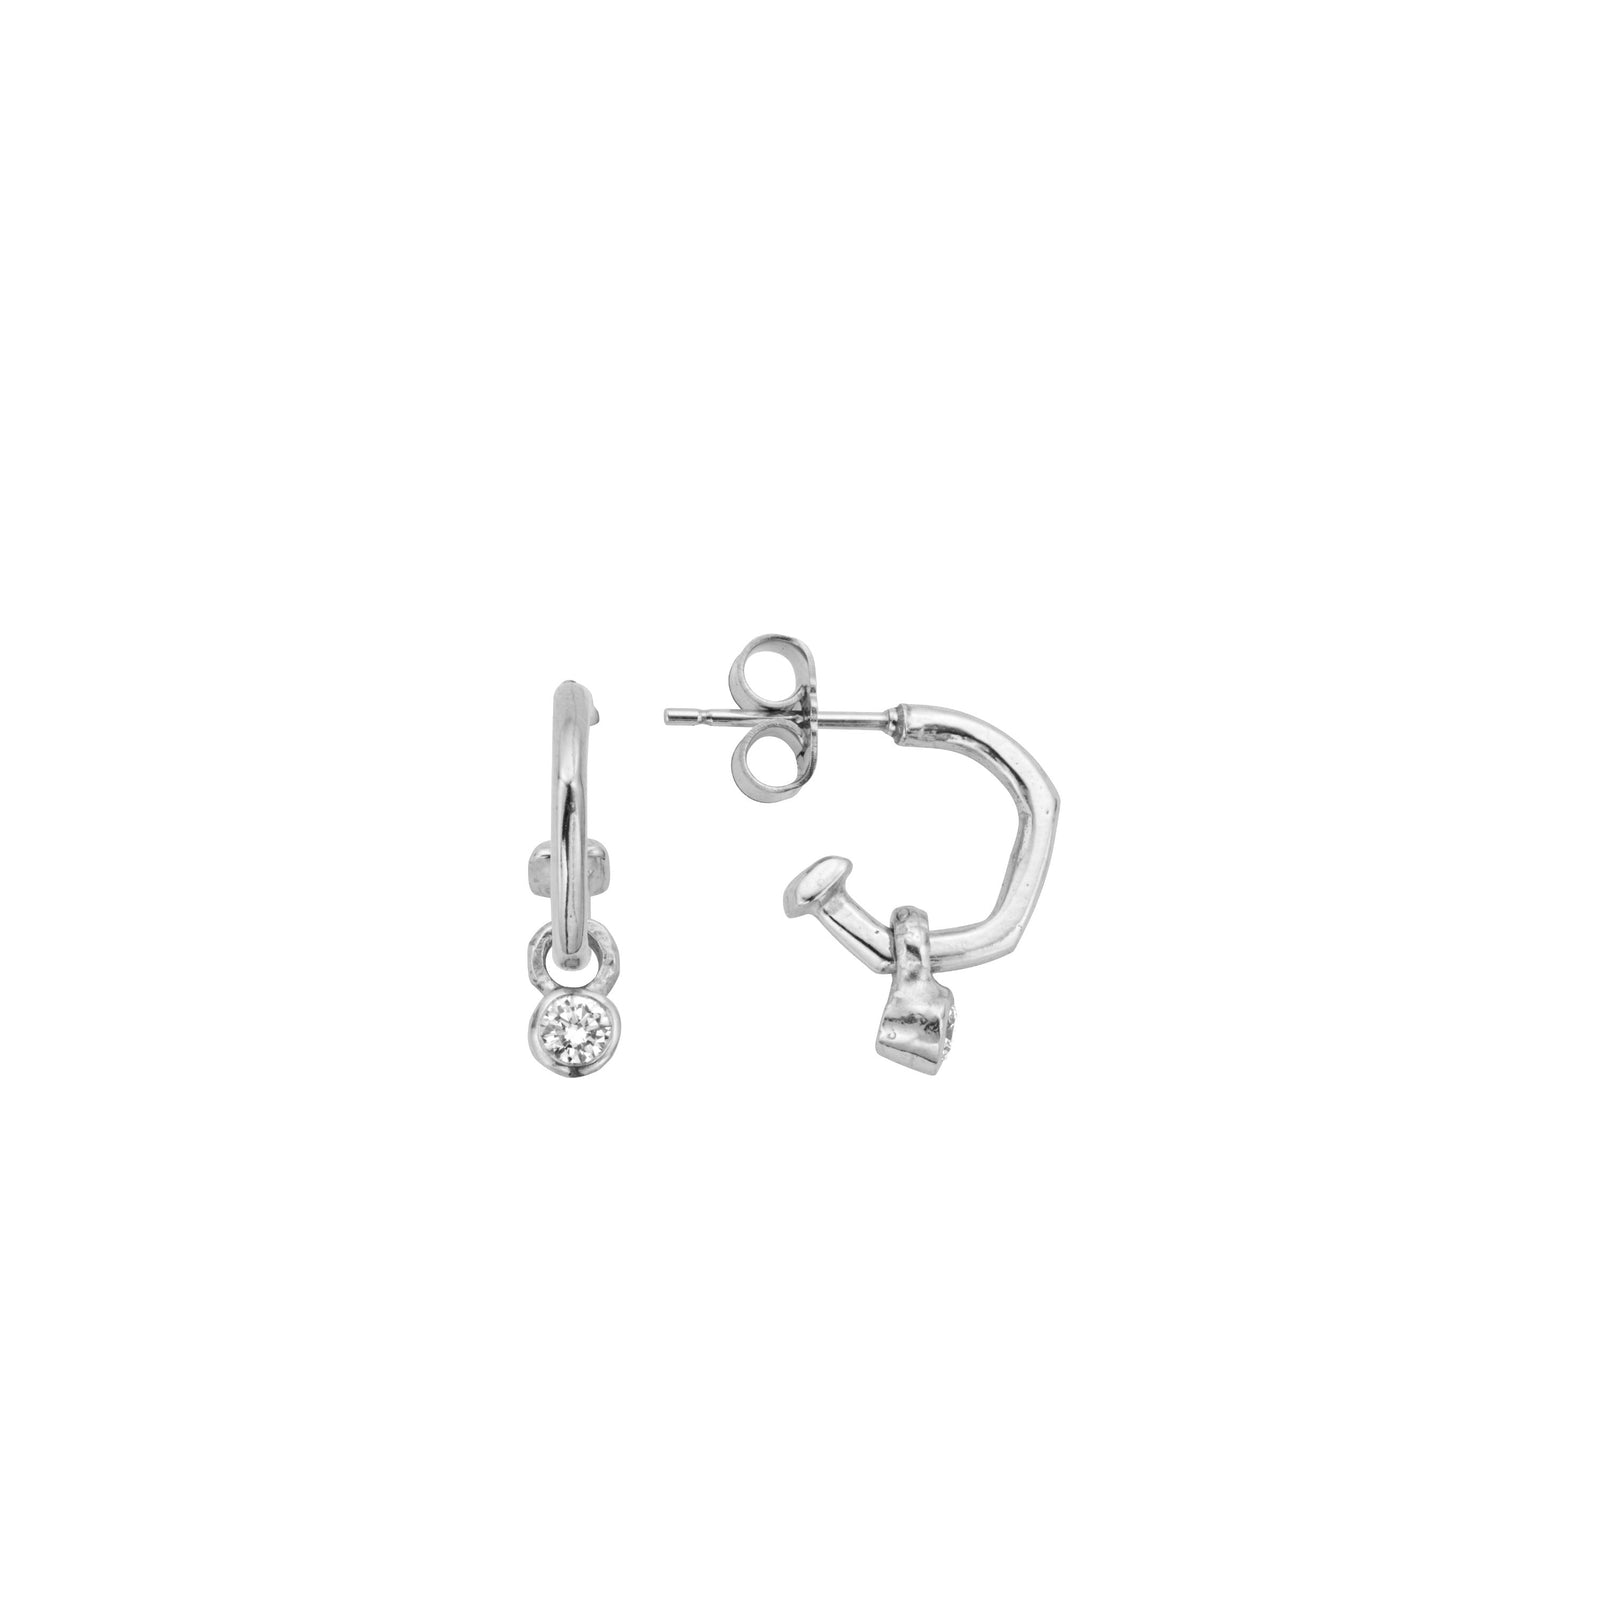 Silver Tiny Cupid Hoops with Mini Diamond Earring Charms